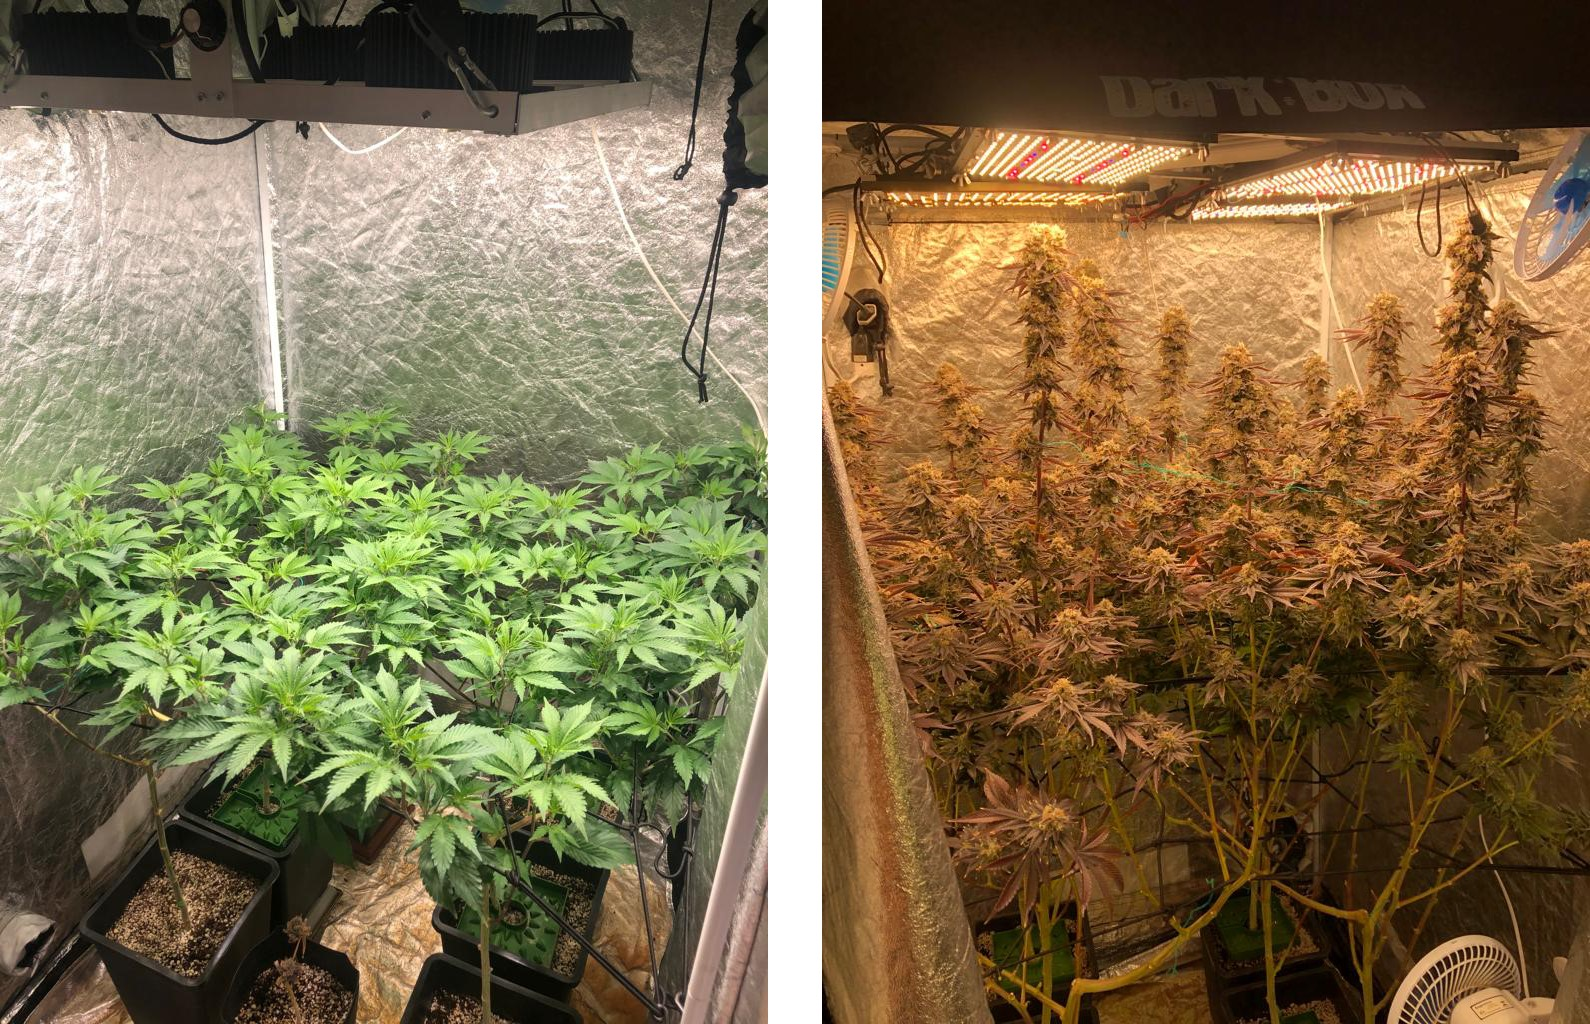 This was my grow on 2019, where I Harvest 740grams on 1m².